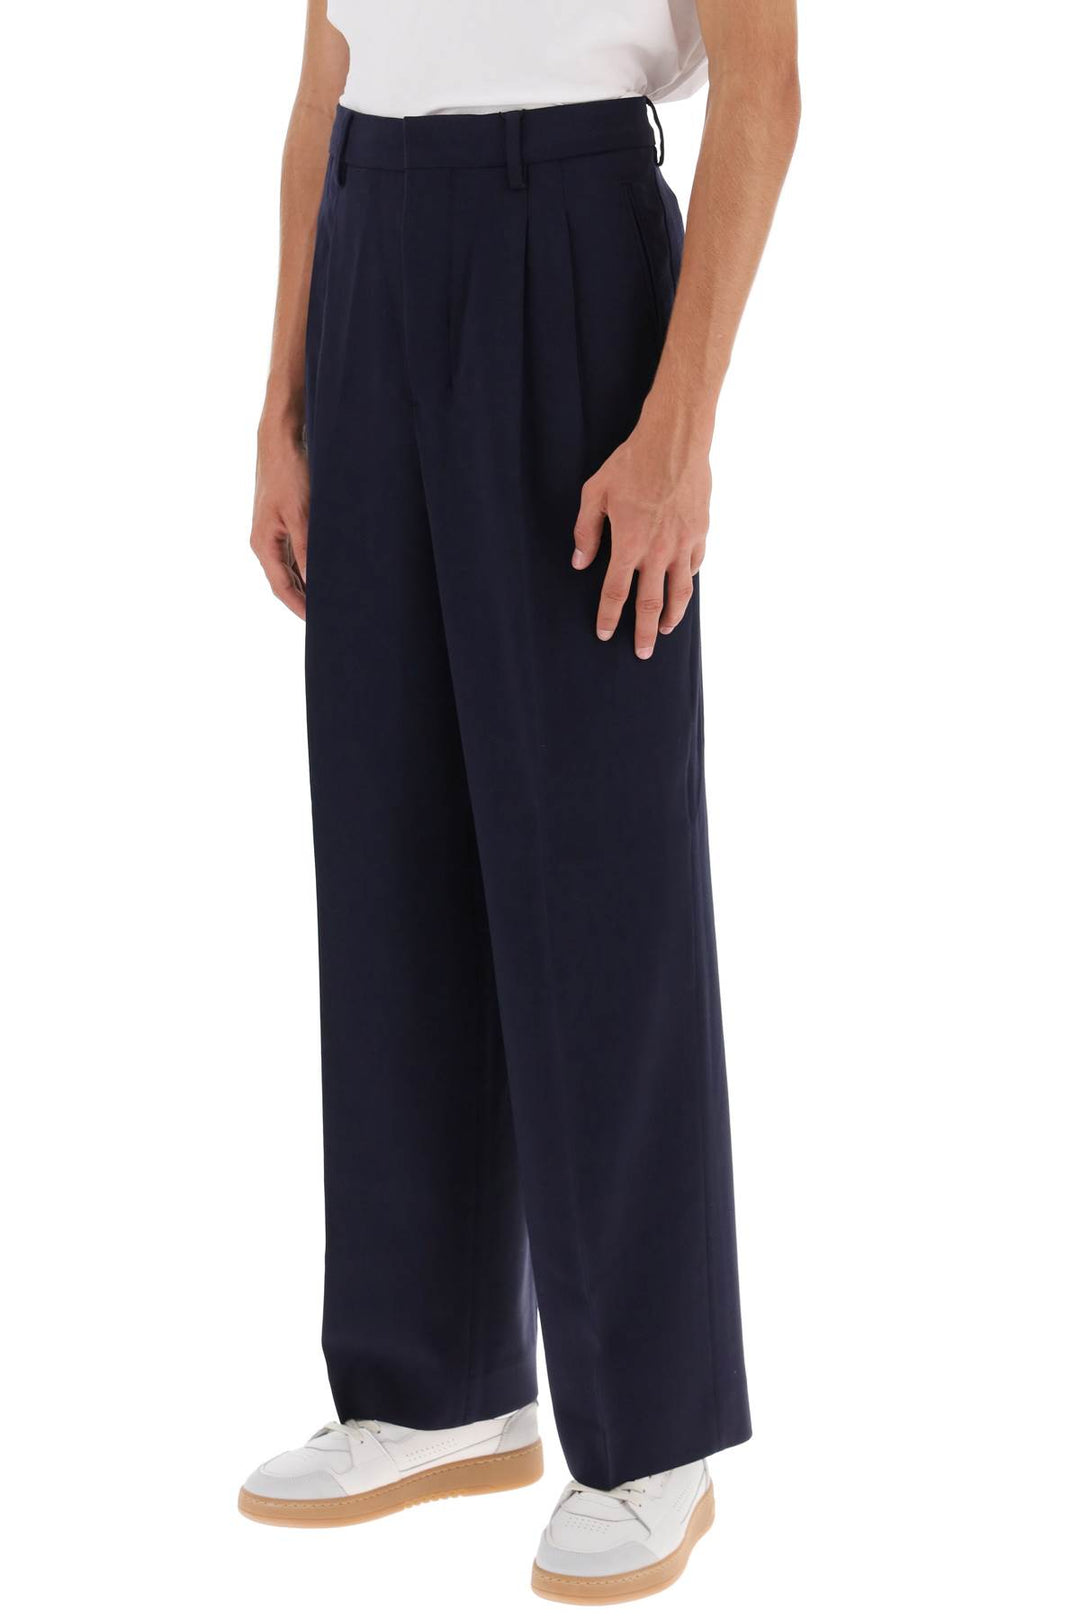 Ami paris loose fit pants with straight cut-3